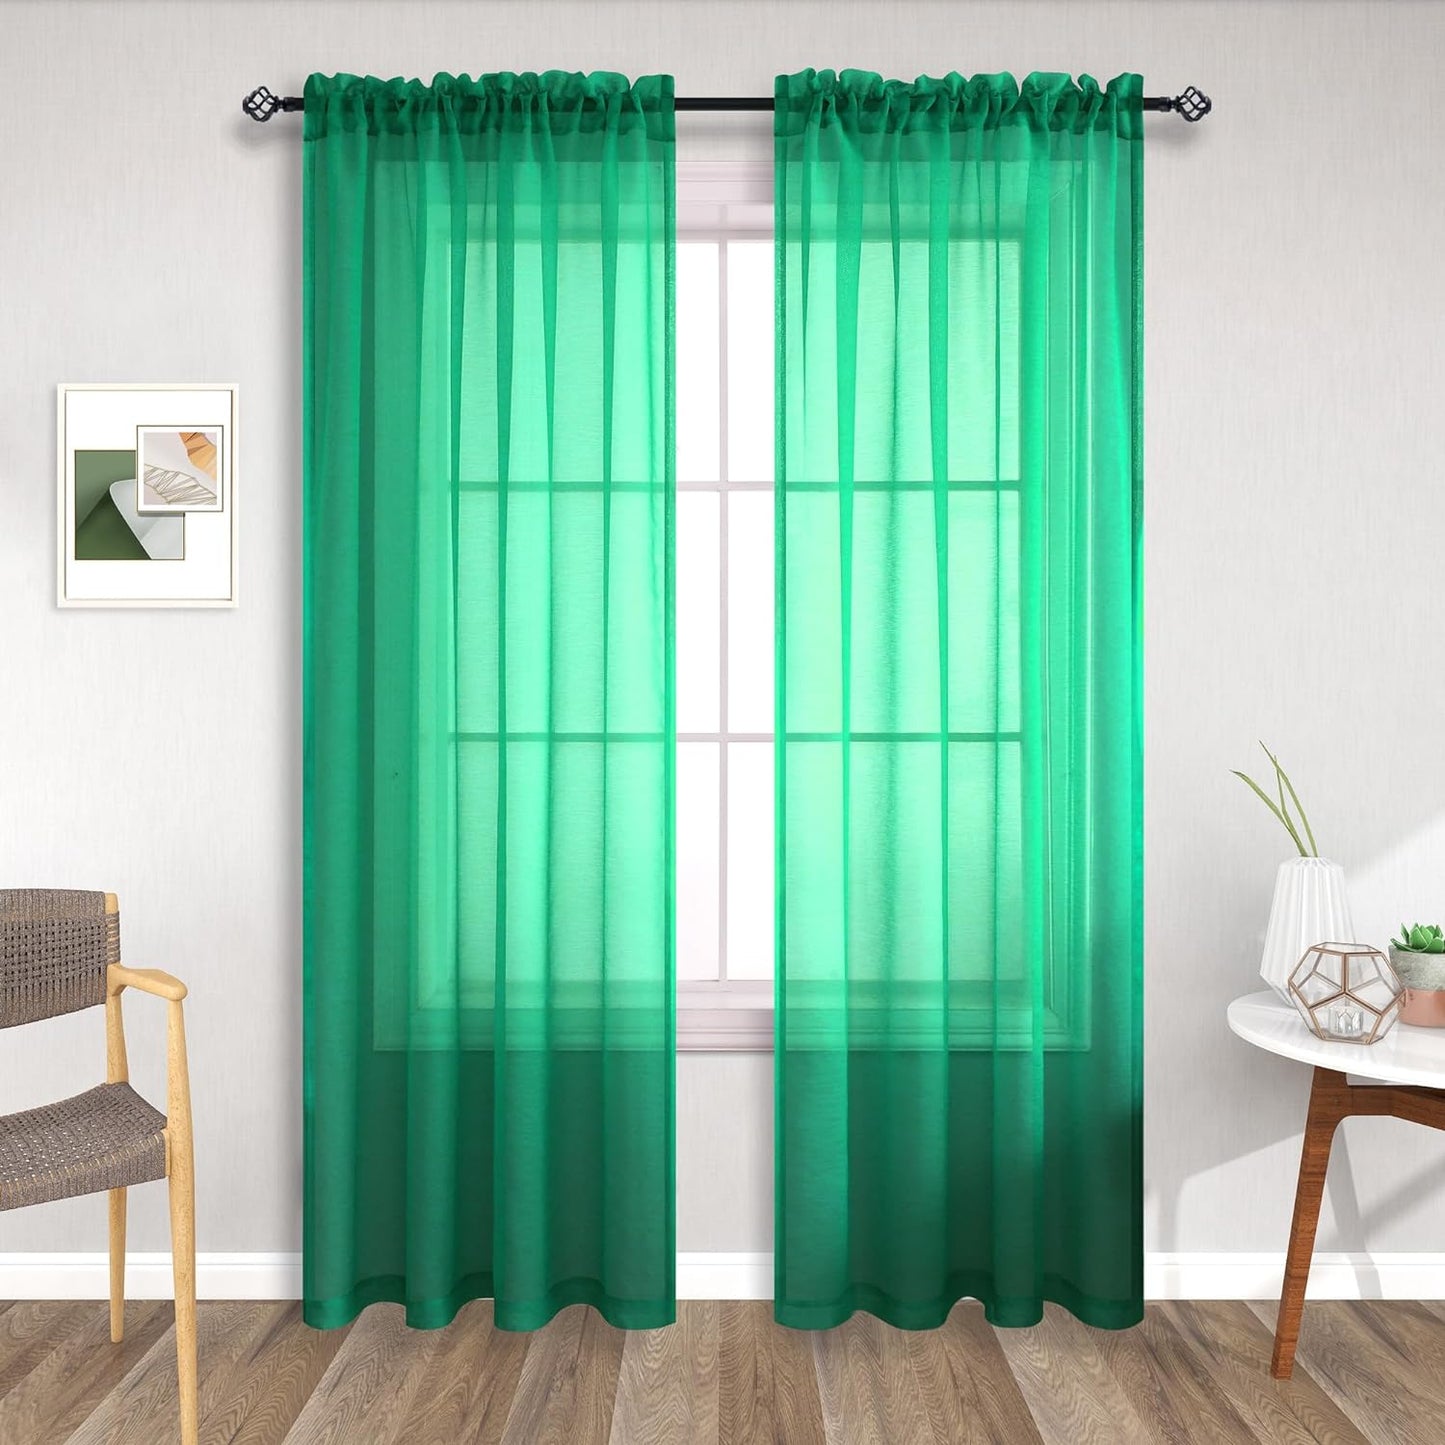 Terracotta Curtains 84 Inch Length for Living Room 2 Panel Sets Rod Pocket Sheer Curtains for Living Room Rust Burnt Orange Red  PITALK TEXTILE Green 52X84 